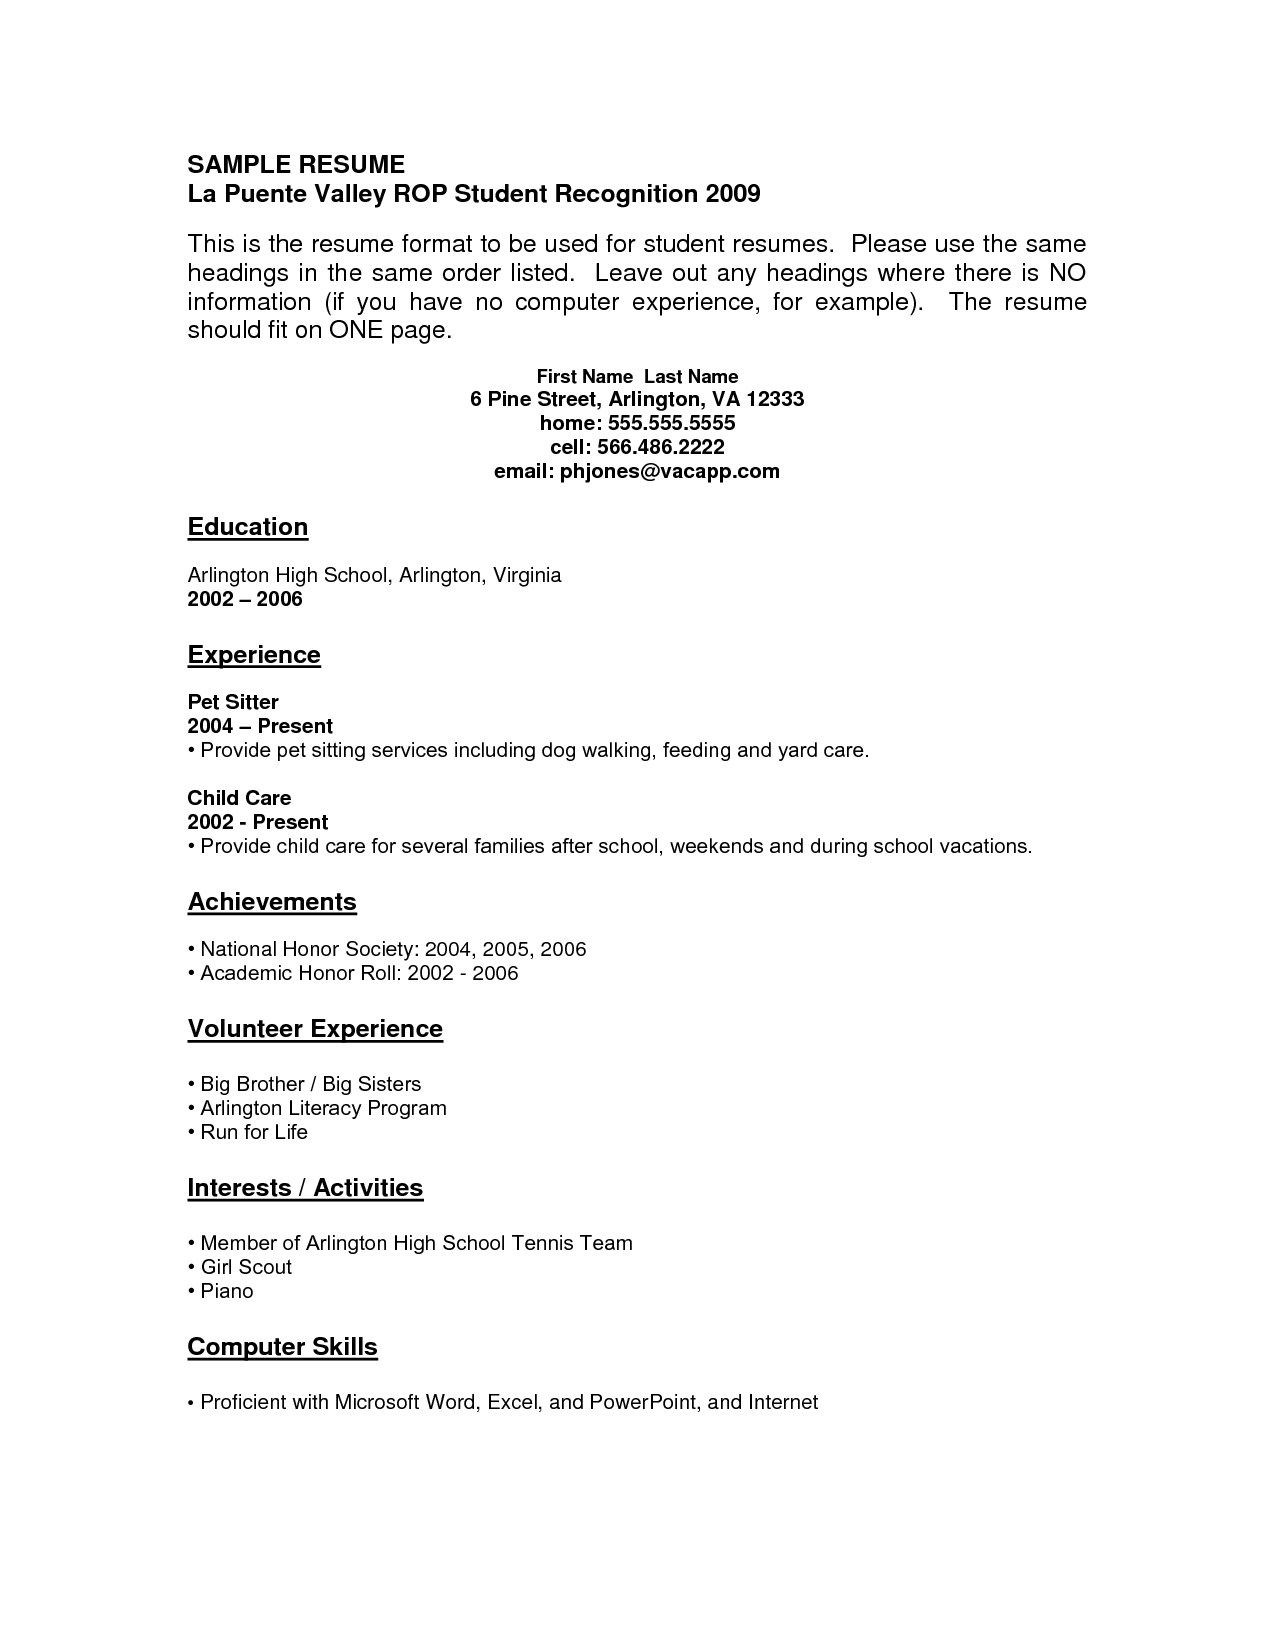 Free Resume Templates with No Work Experience Resume Examples with No Job Experience – Resume Templates Job …